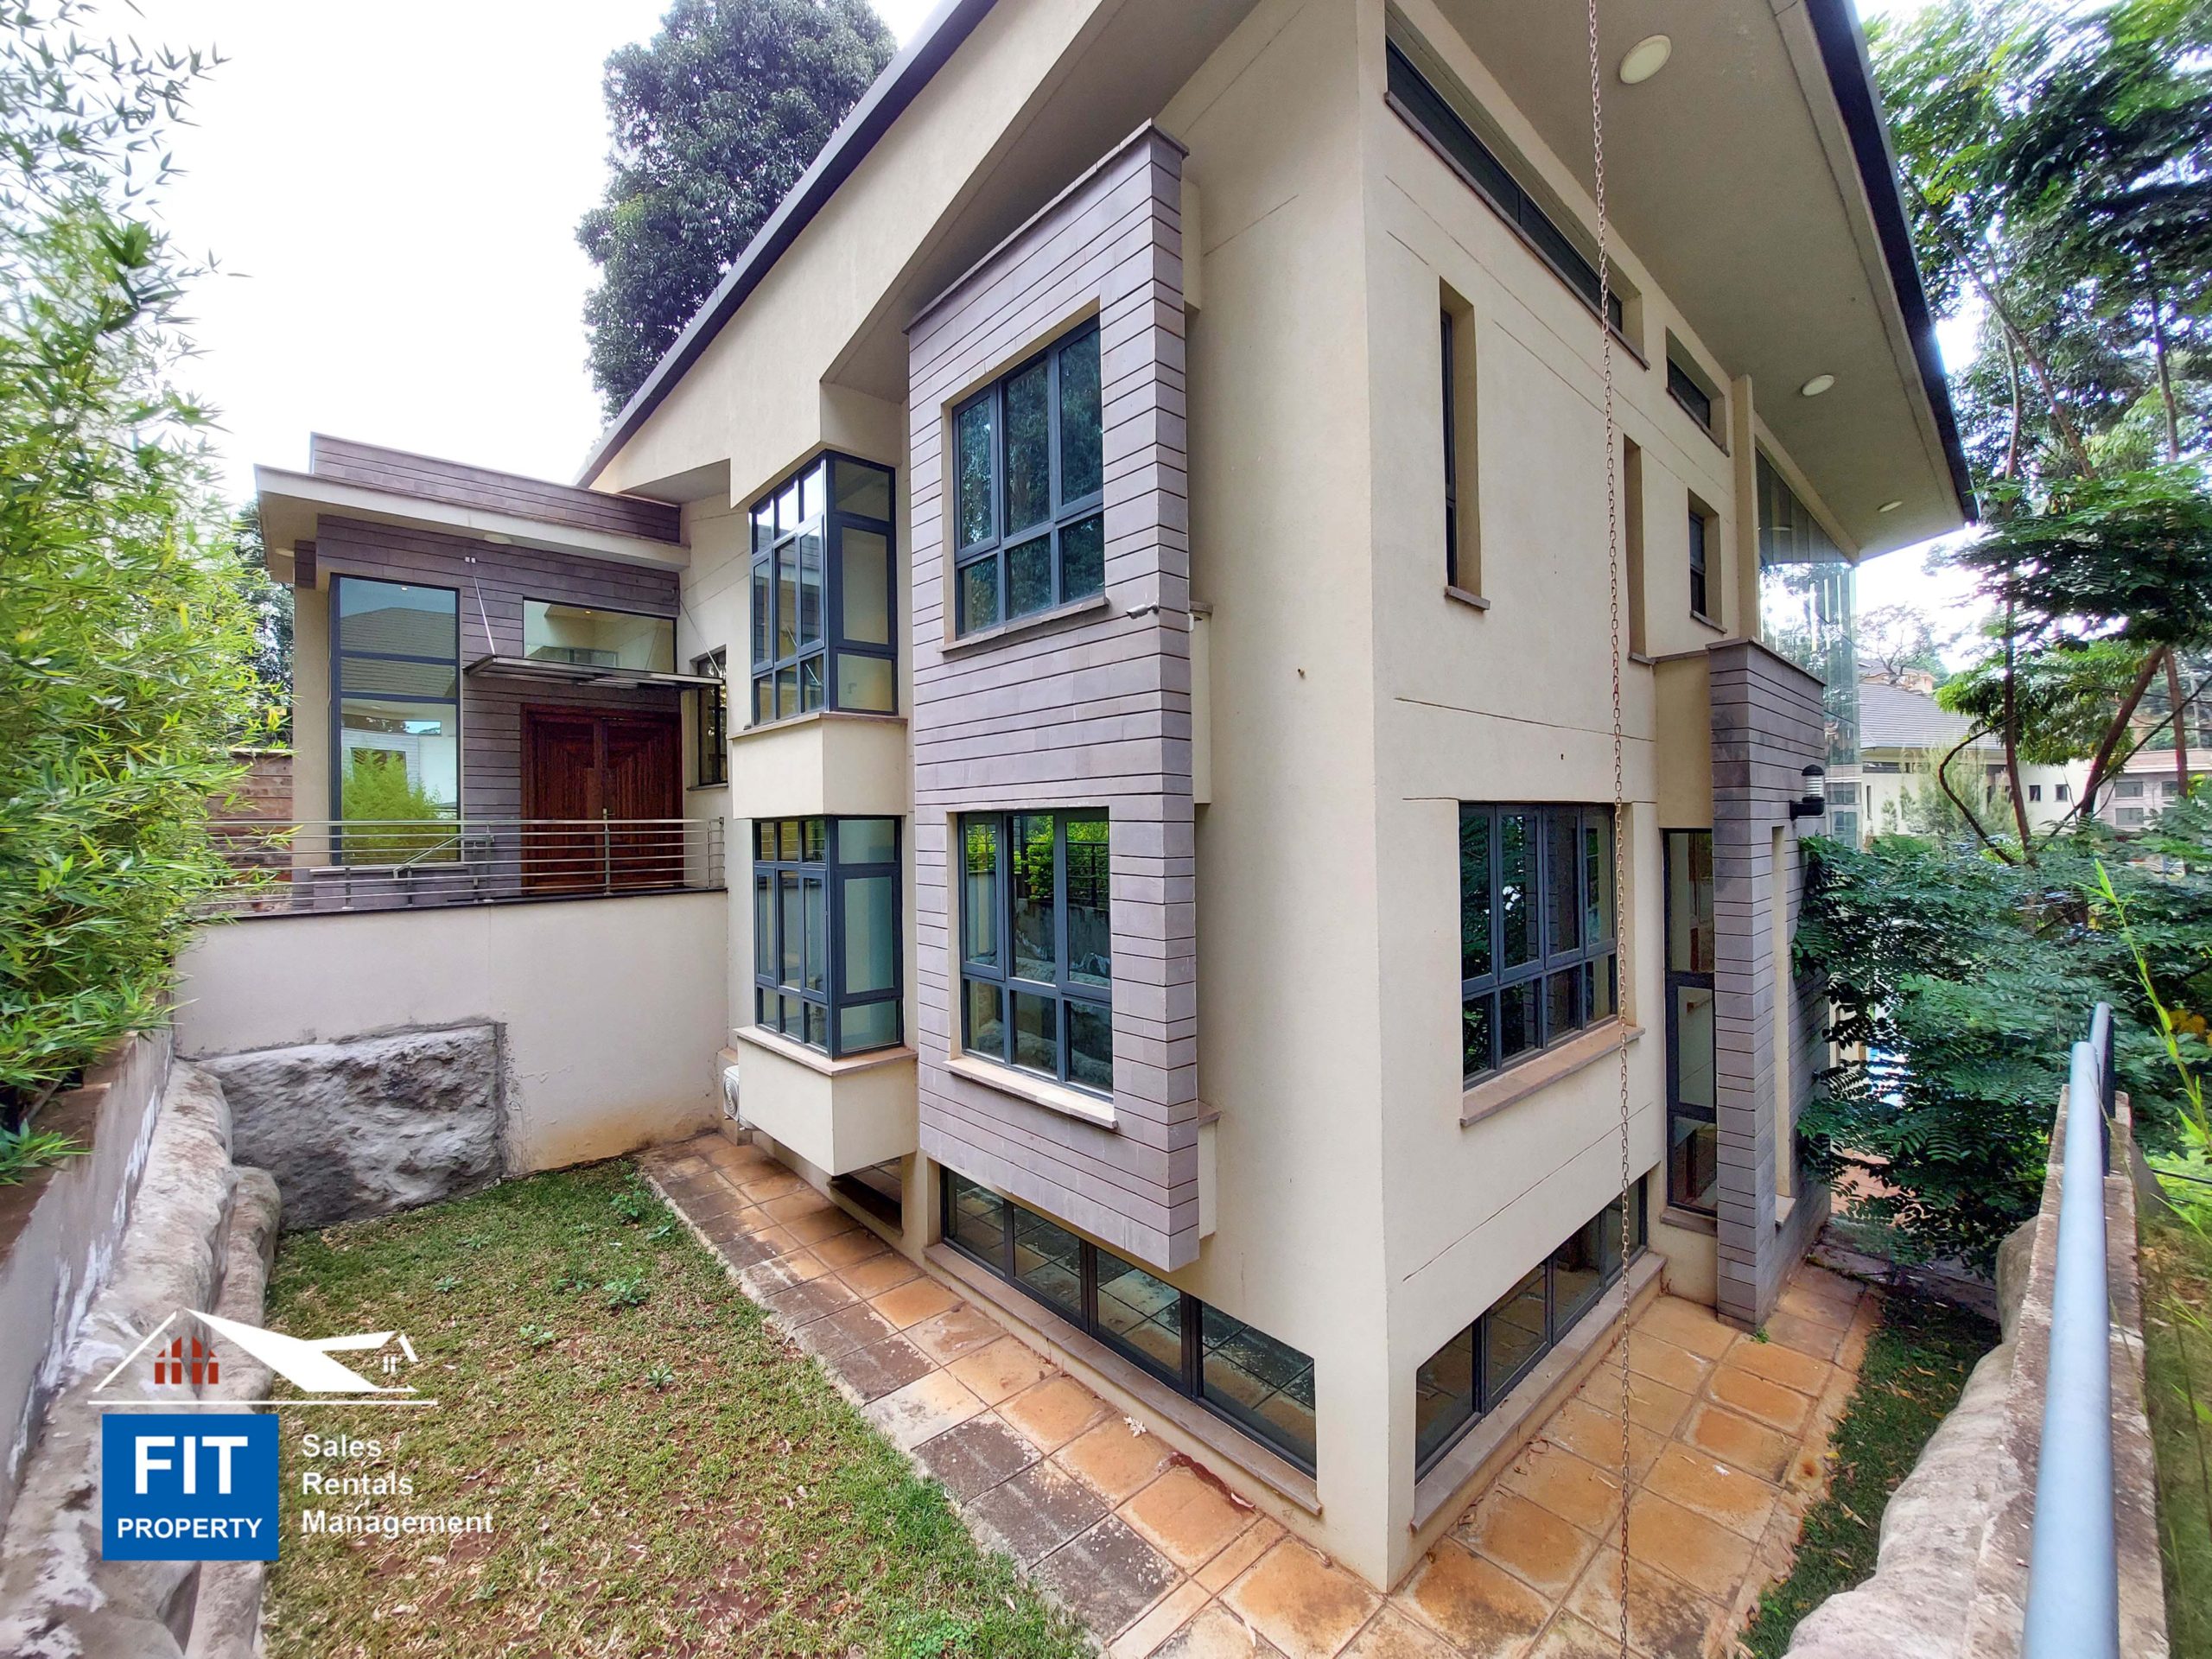 5 bedroom Villa with a pool for Sale, Lower Kabete, Nairobi on approx half acre. Price of this 5 bedroom villa: KES 160M. FIT PROPERTY